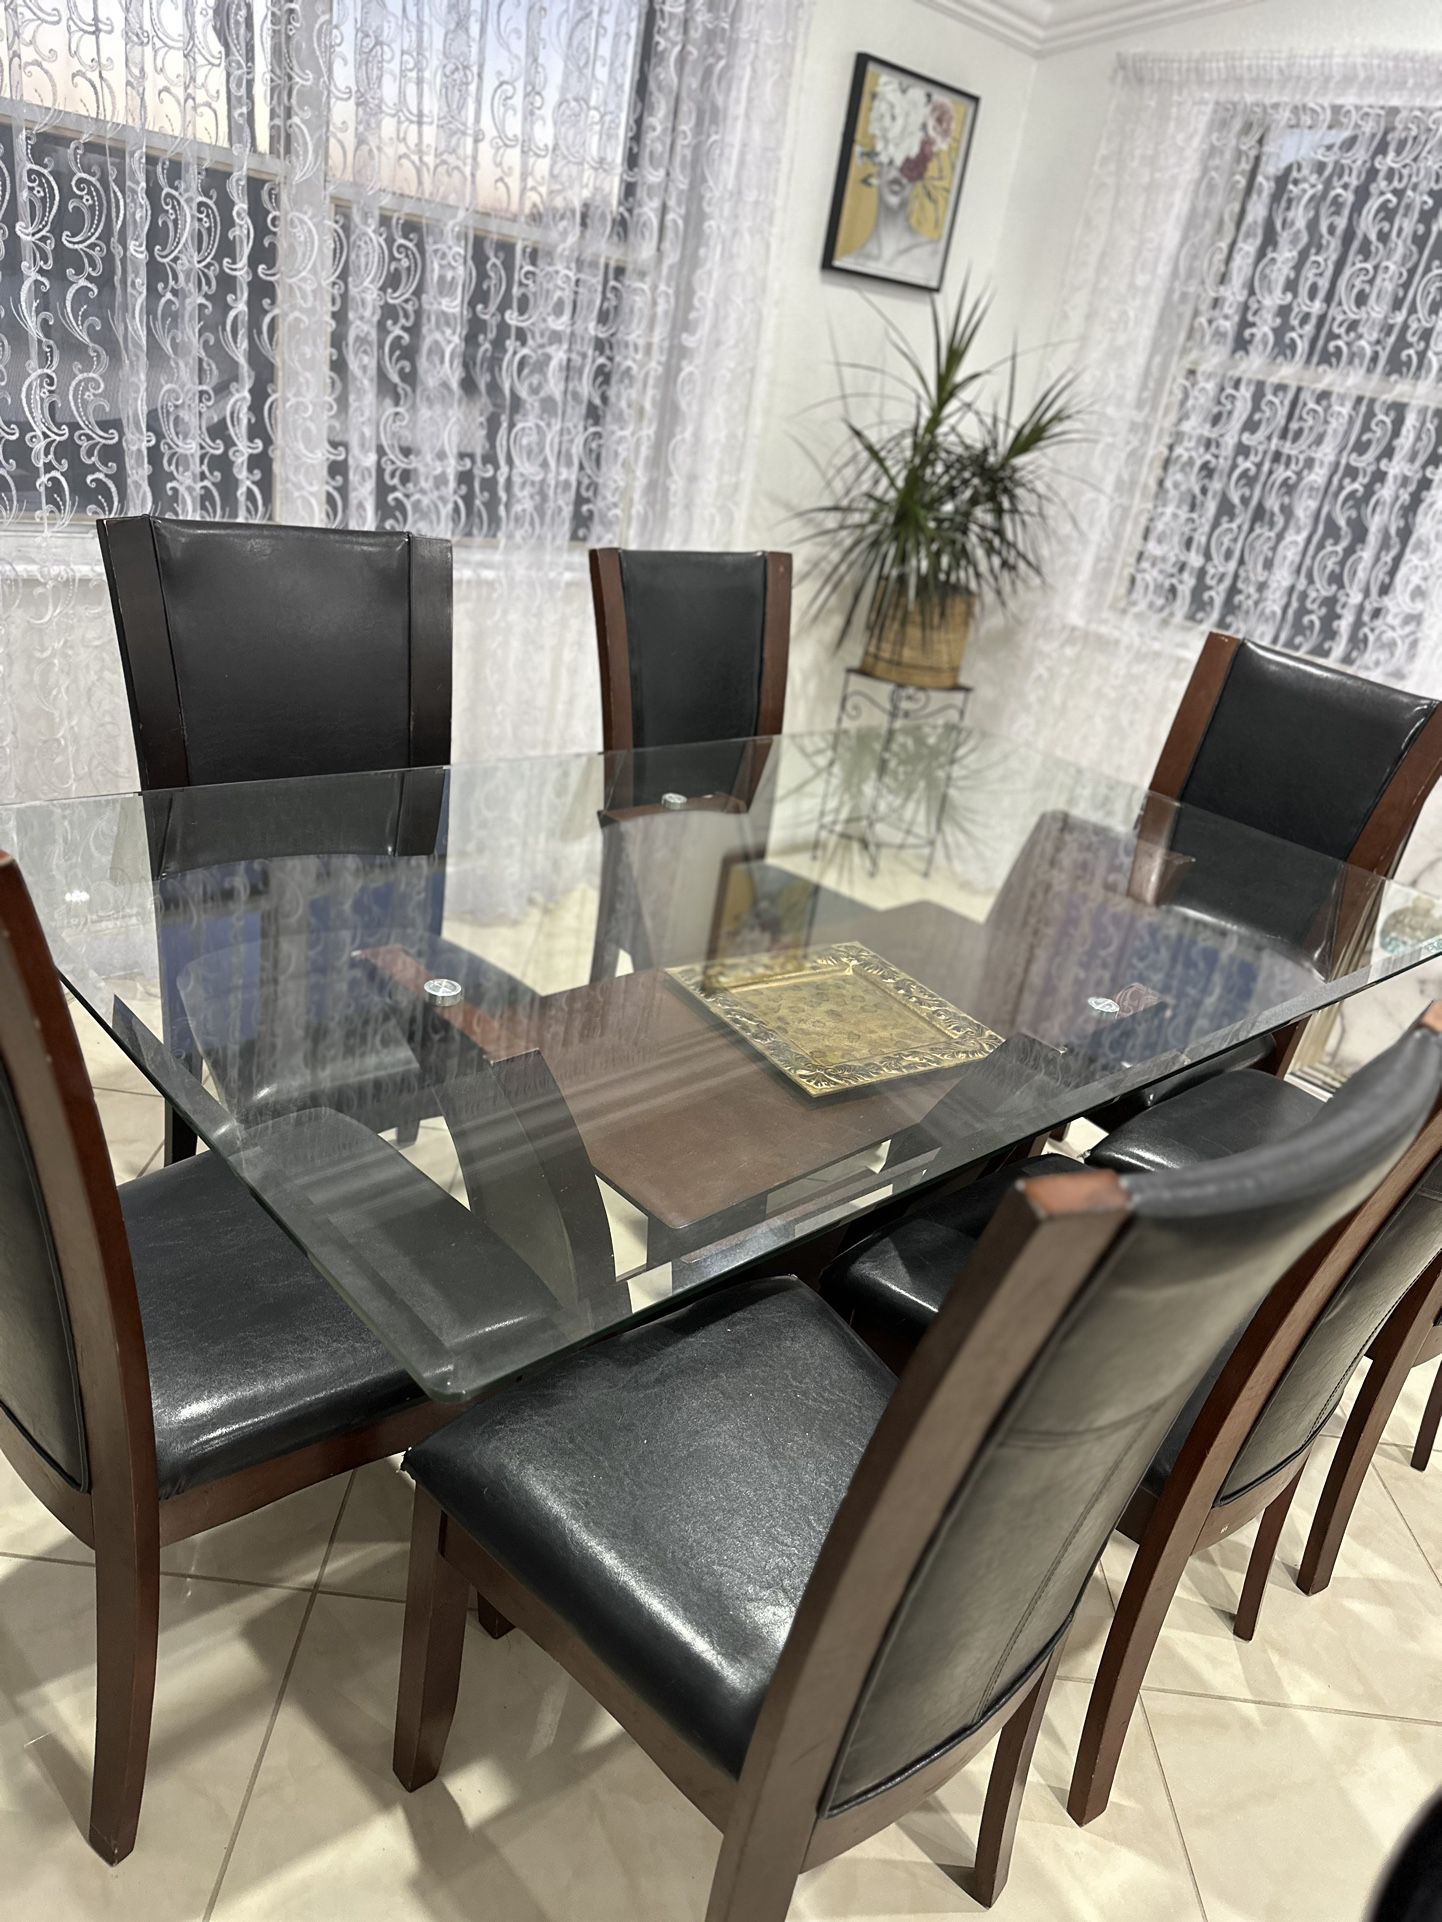 Dining Table Plus 8 Chairs